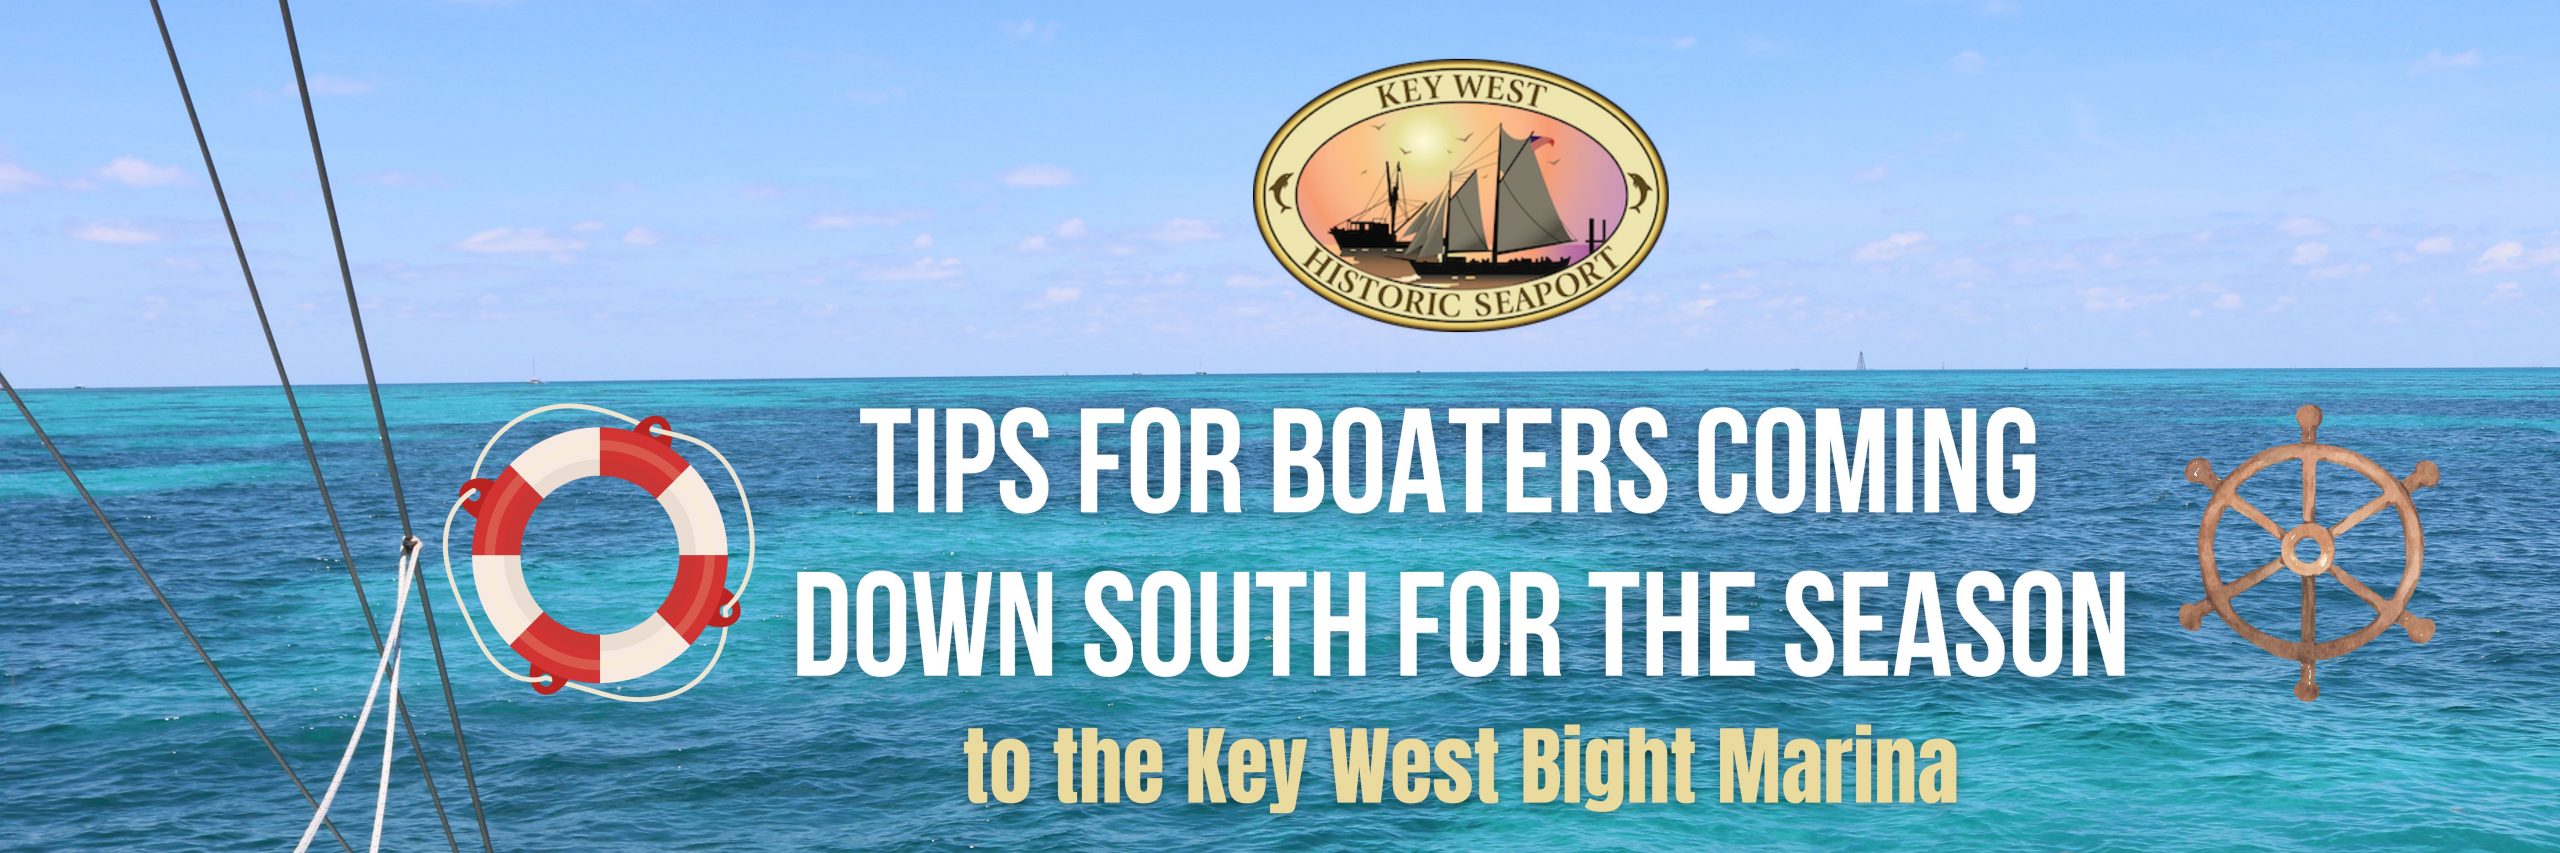 tips for snowbirds coming south for the winter to key west bight marina